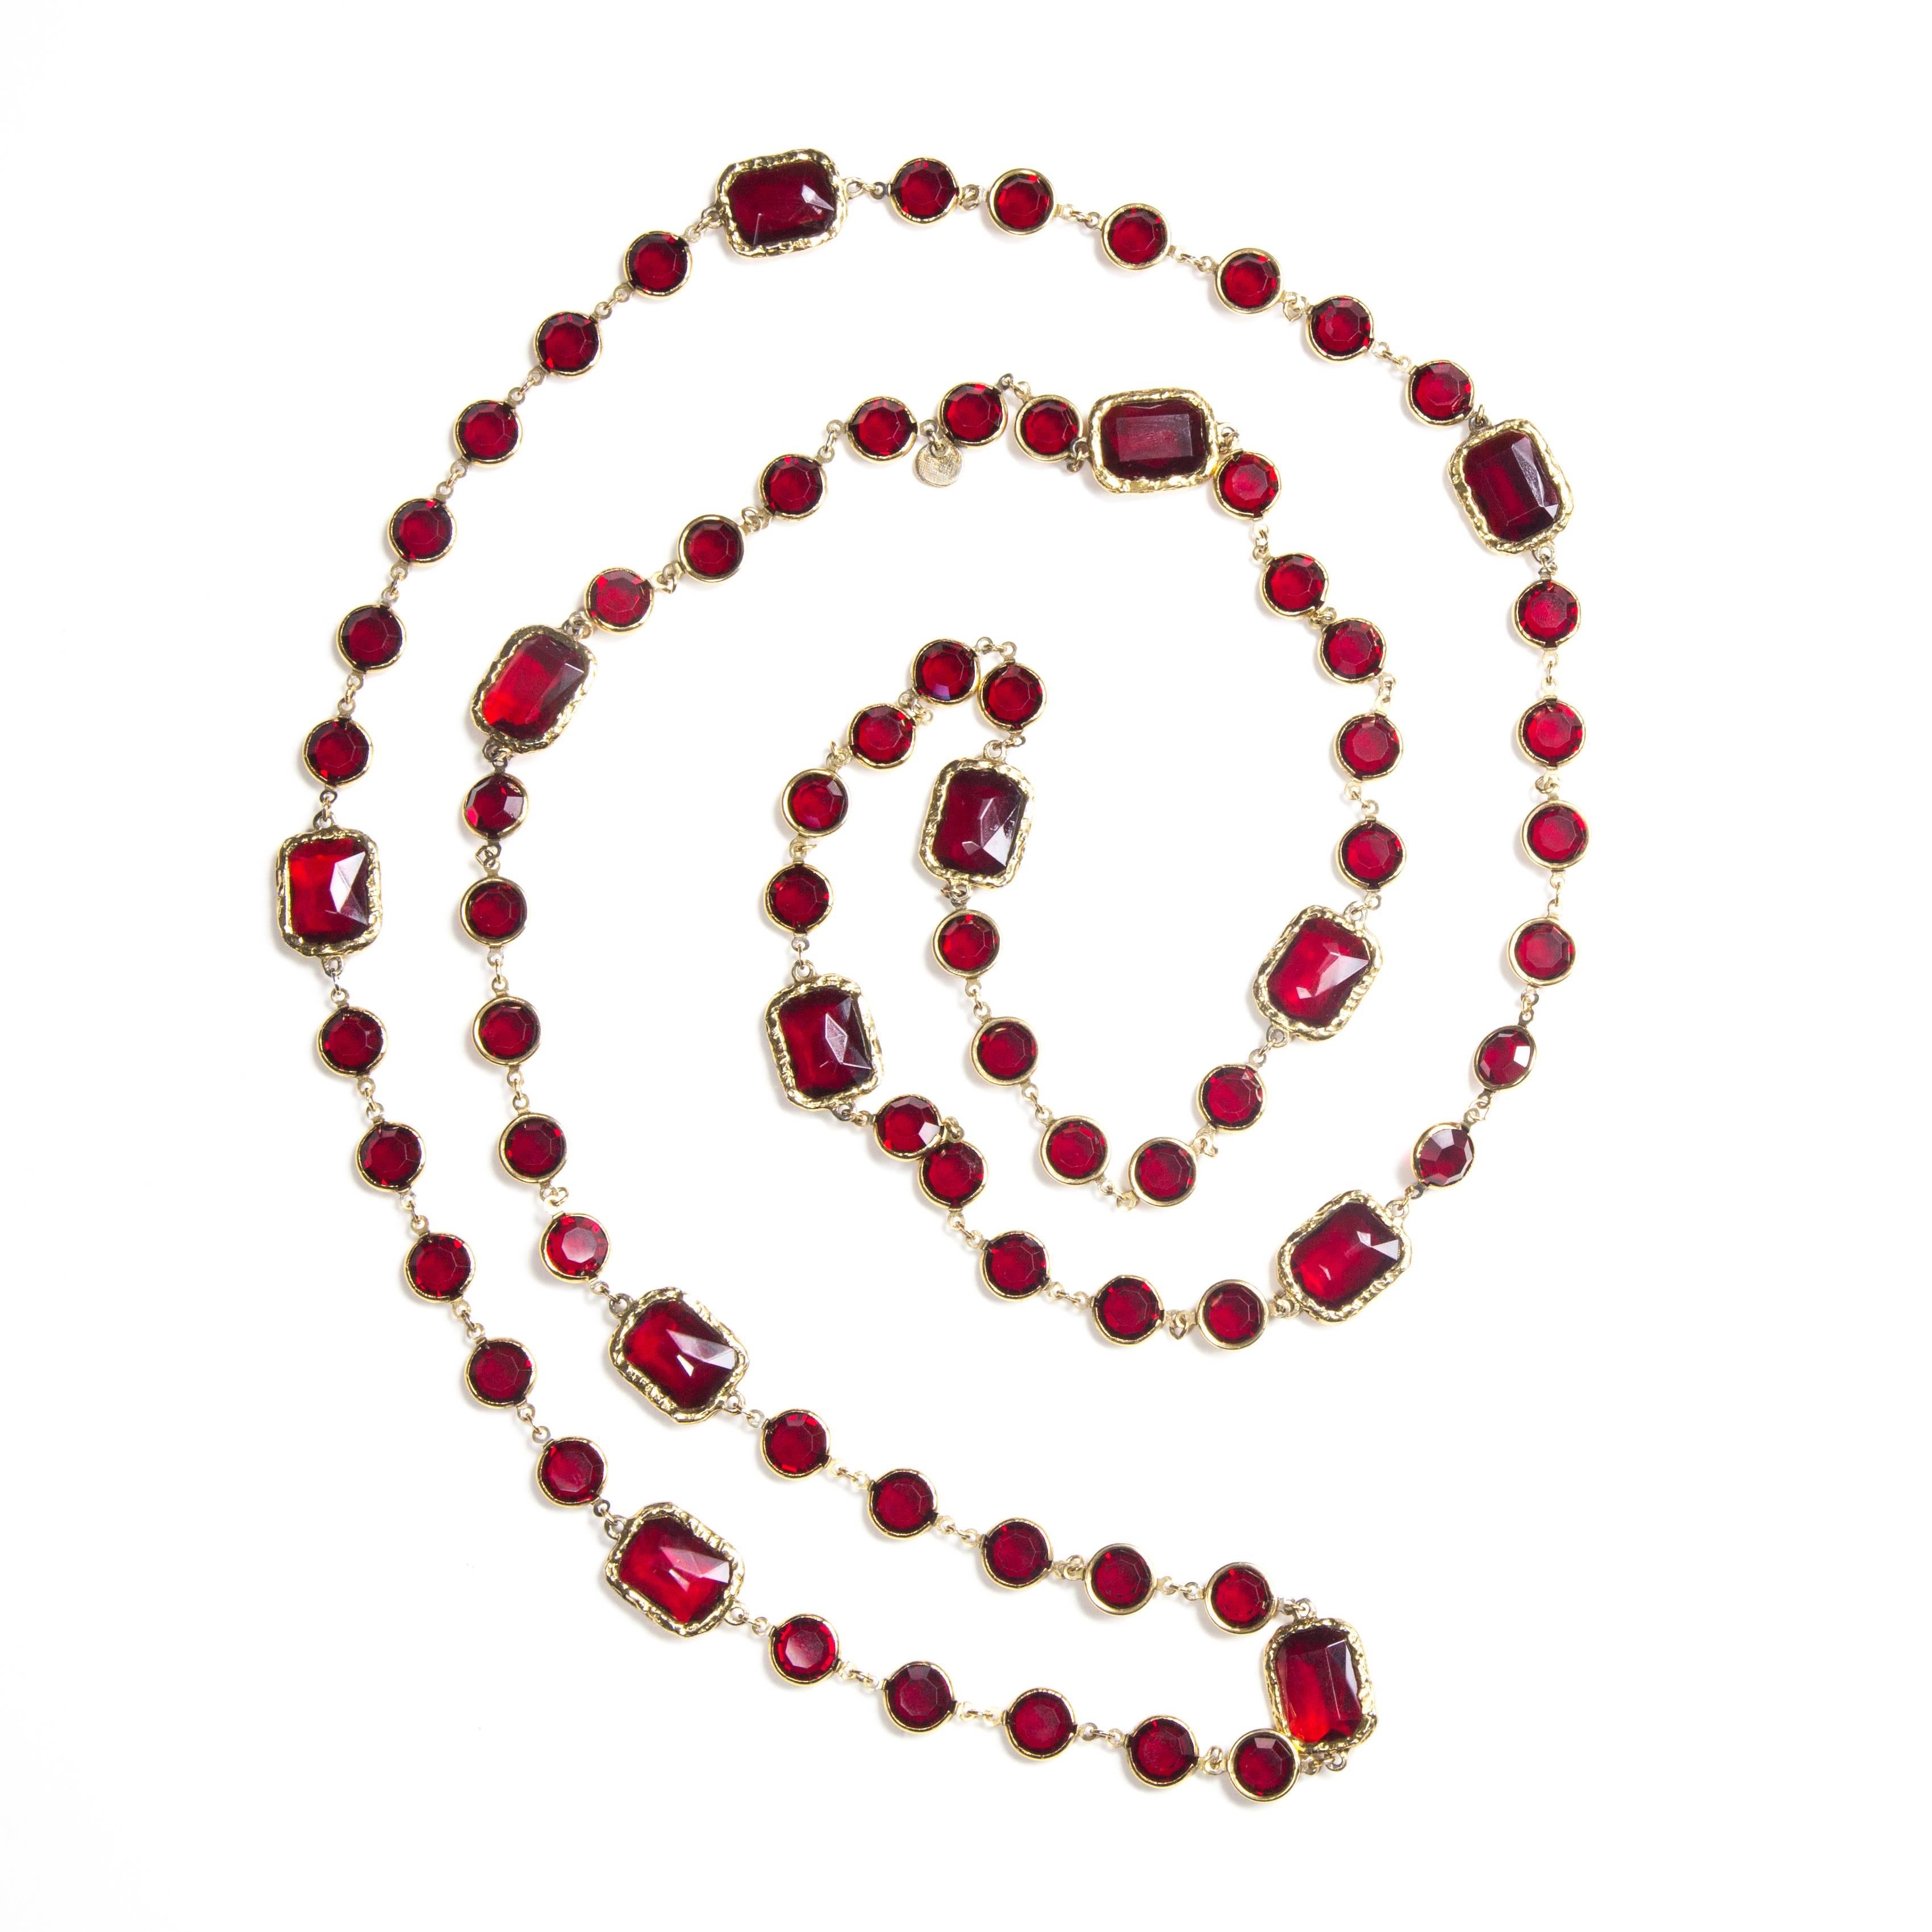 Chanel - Vintage Chicklet Gripoix Glass Necklace

Color: Red / Gold

Material: Glass

------------------------------------------------------------

Details:

- gold tone hardware

- glass chicklet & round stations

- logo tag stamped